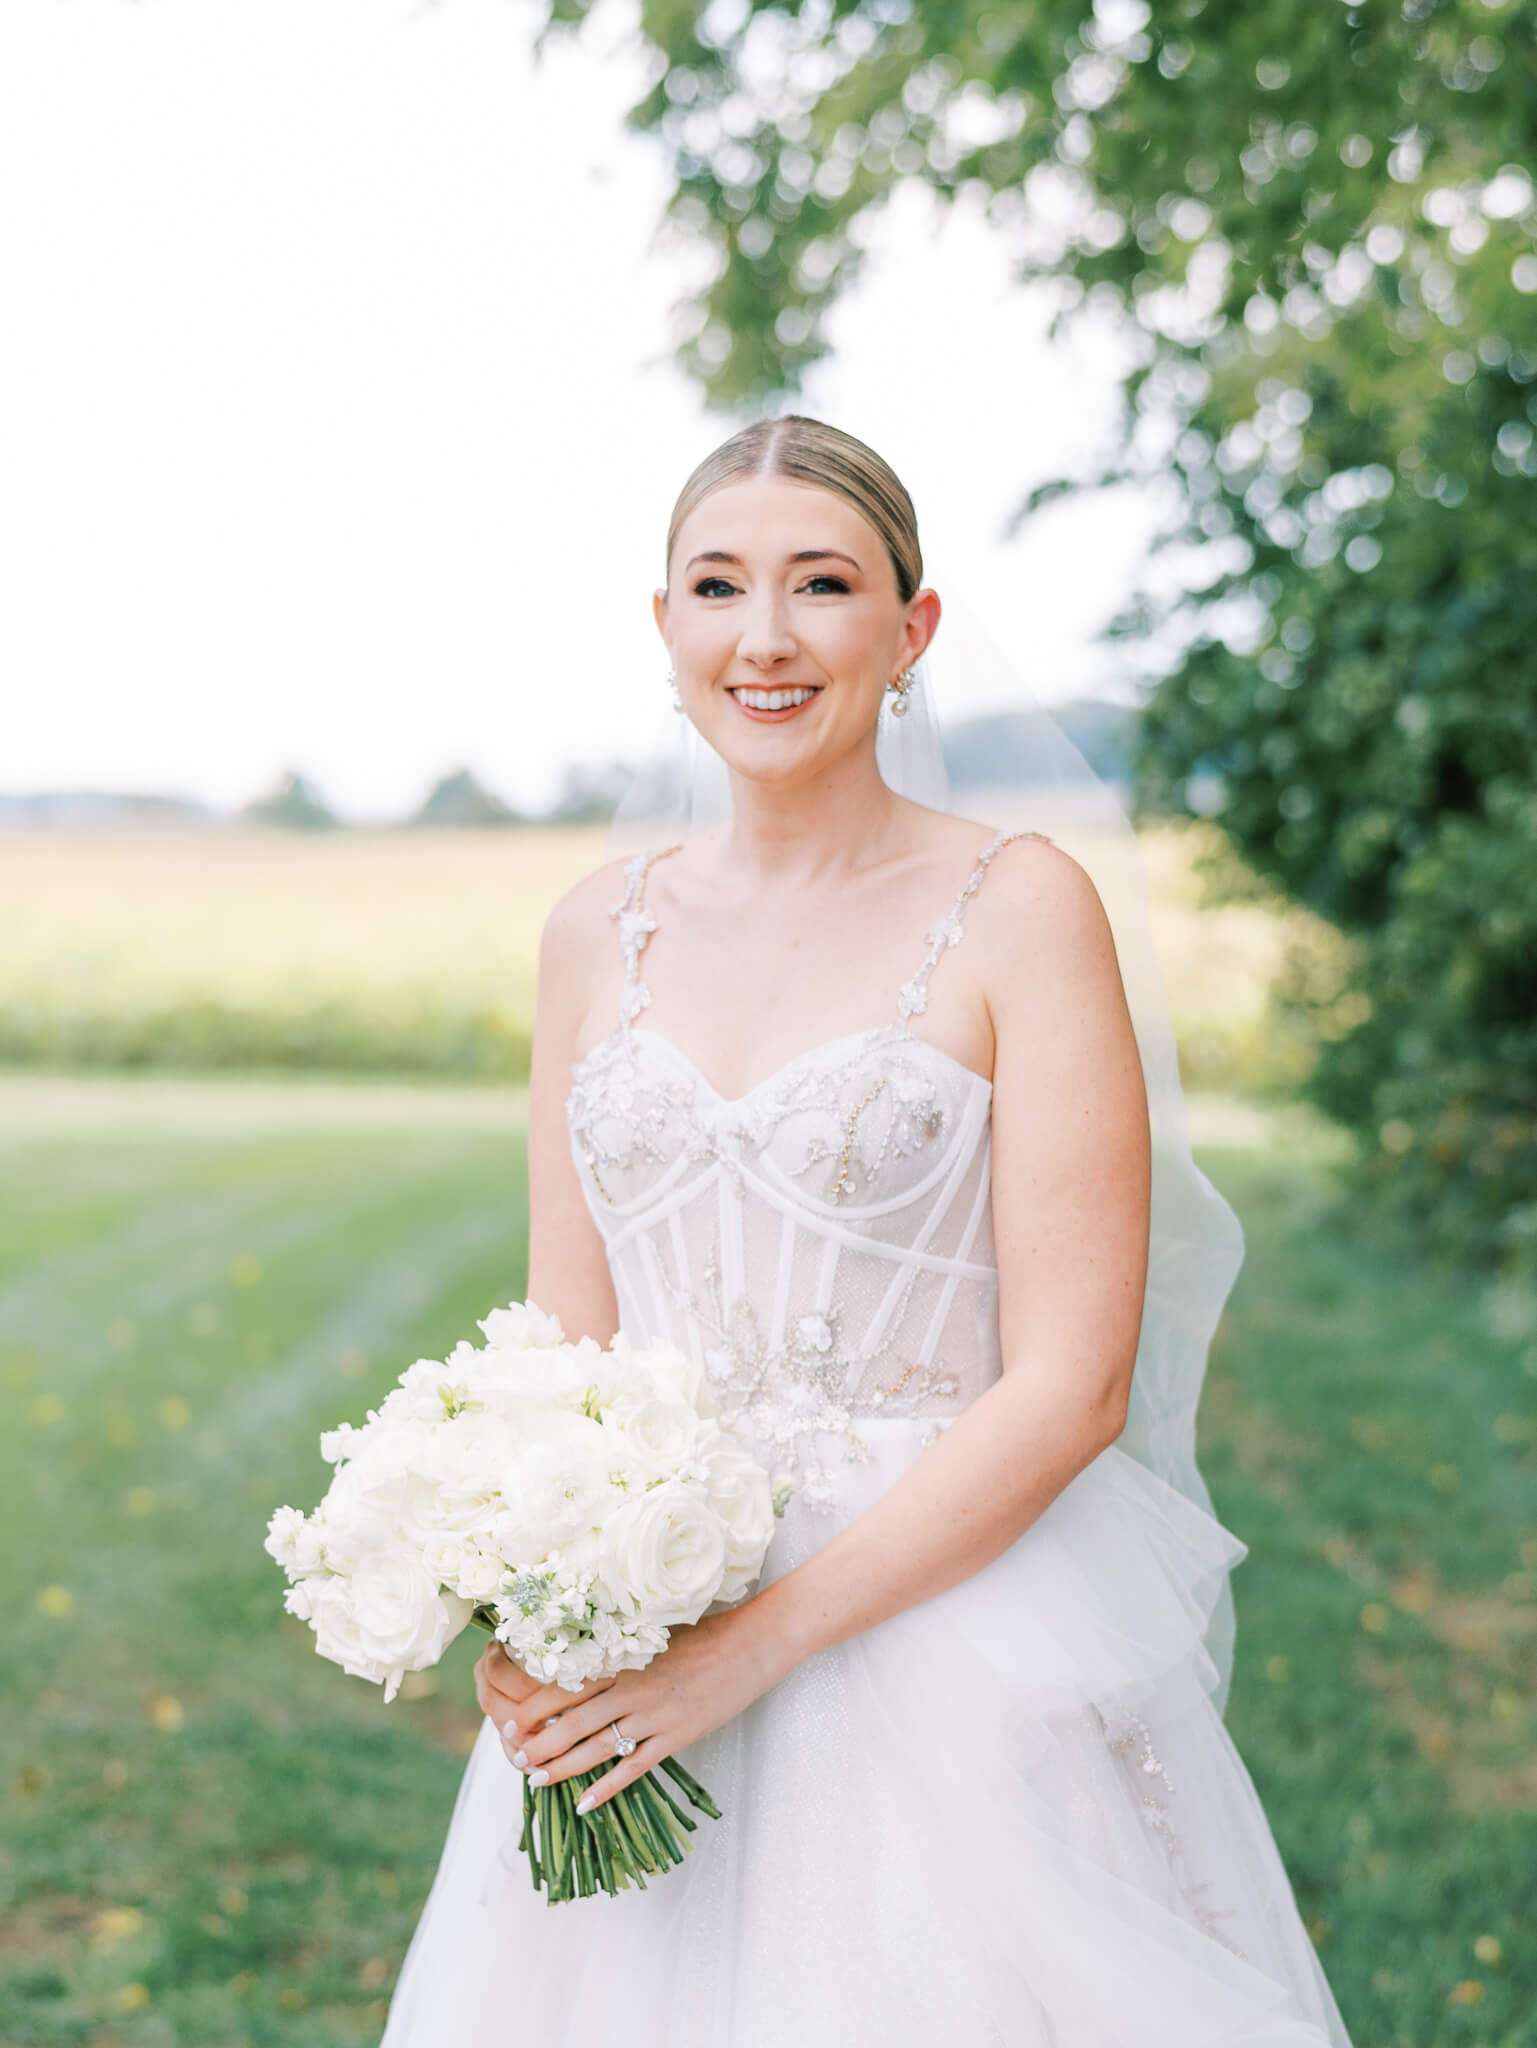 Closeup of a bride on her wedding day holding her bouquet standing in front of a field and shrubs